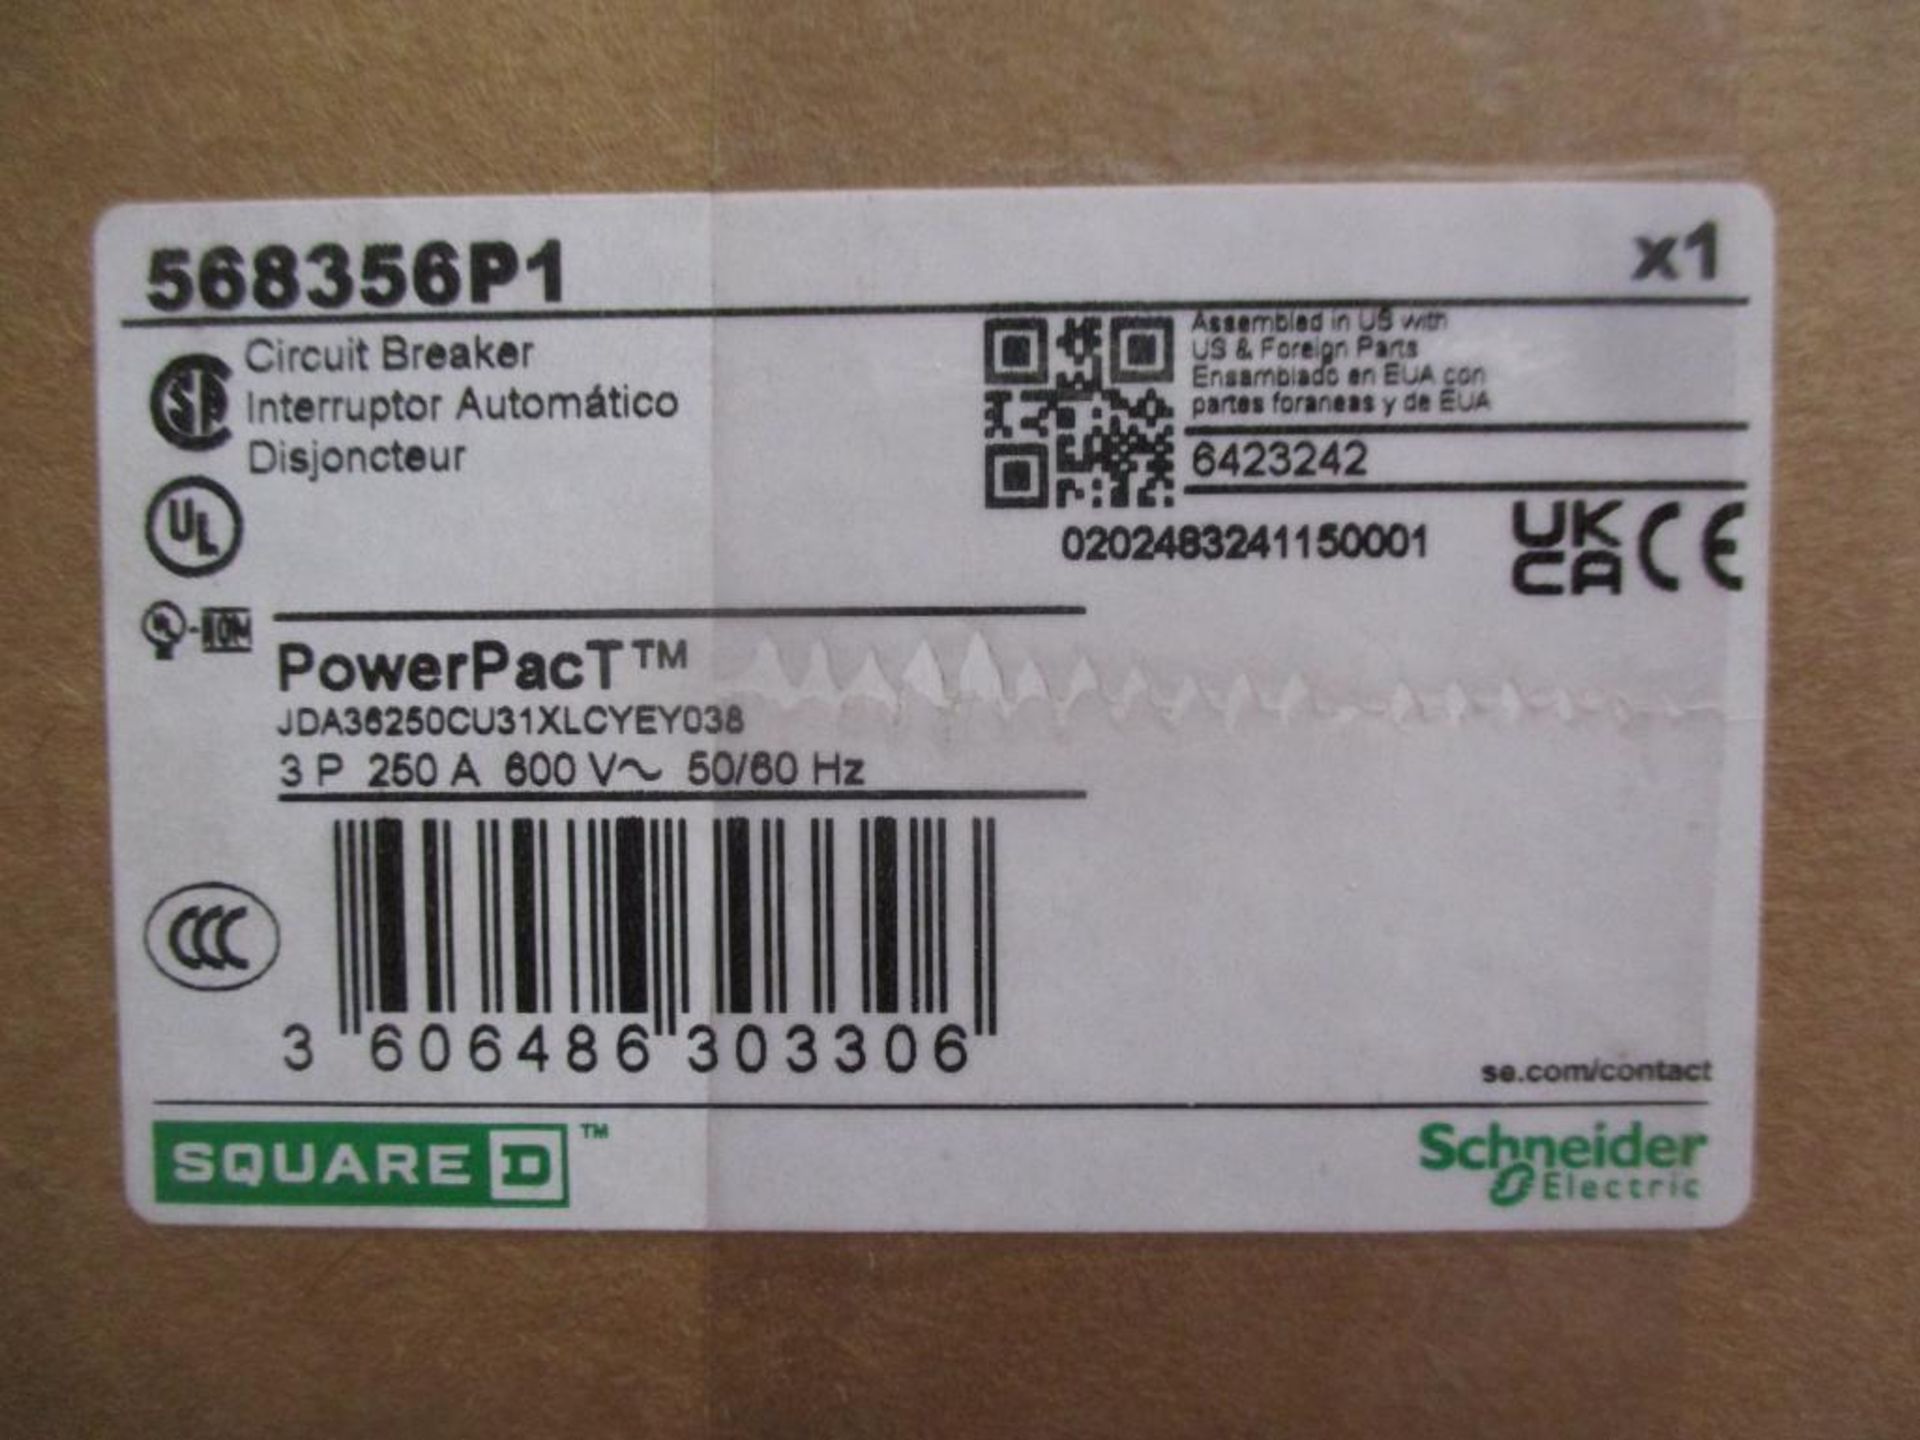 Square D 250 AMP Circuit Breaker, 568356P1, 3P, 250A, 600VAC, PowerPacT (New in Box) - Image 4 of 4